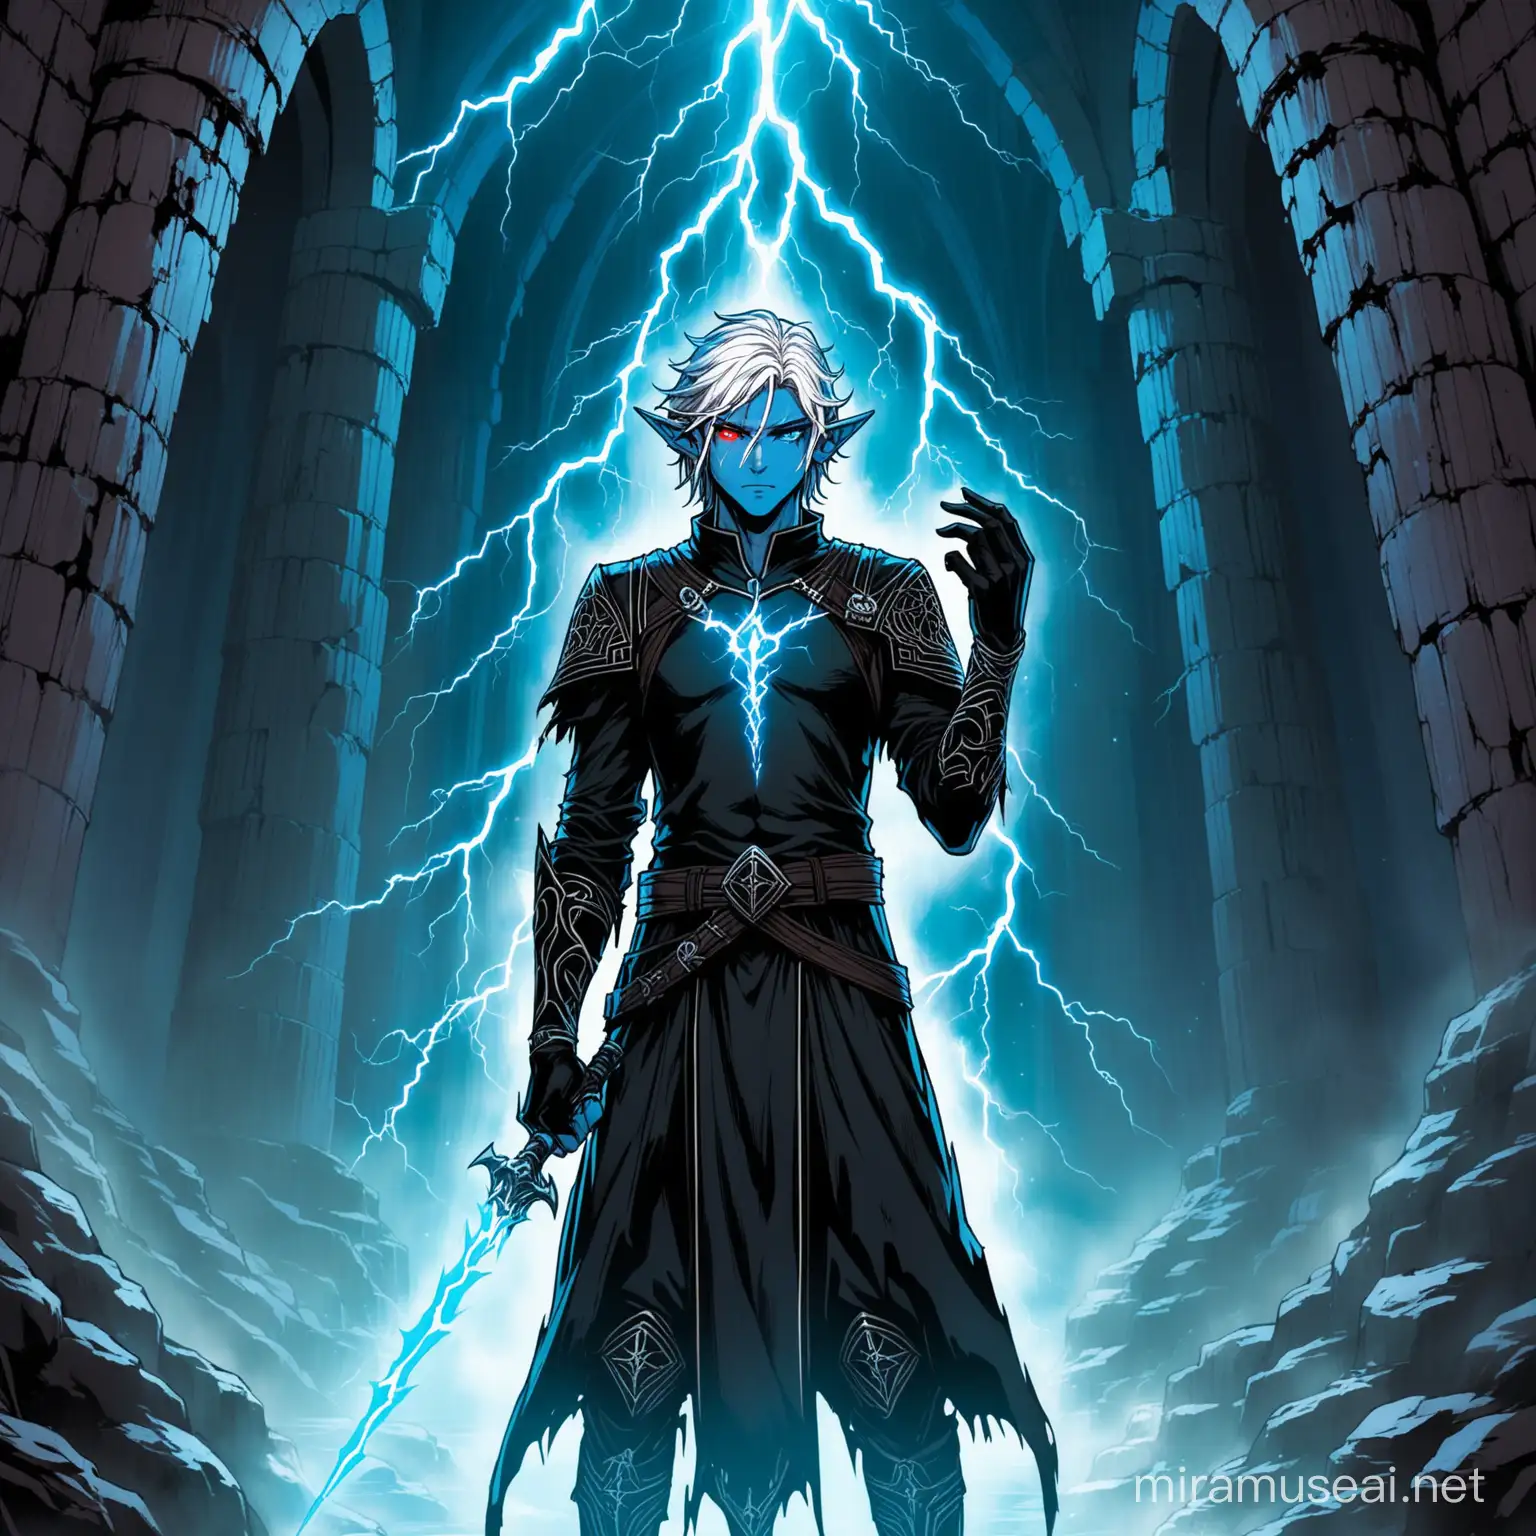 a blue skinned male elf, he has a black tattoo of thorns on the left side of his face, his hair is white, and the roots of his hair is black, his hair is short and wild, he has heterochromia, his left eye is neon red, his right eye is hazel, he wears black clothes like a sith from star wars, and he has an aura of lightning, the lightning is red, and he is standing in an ancient castle ruin, he has black gloves, he controls the lightning with his right hand.